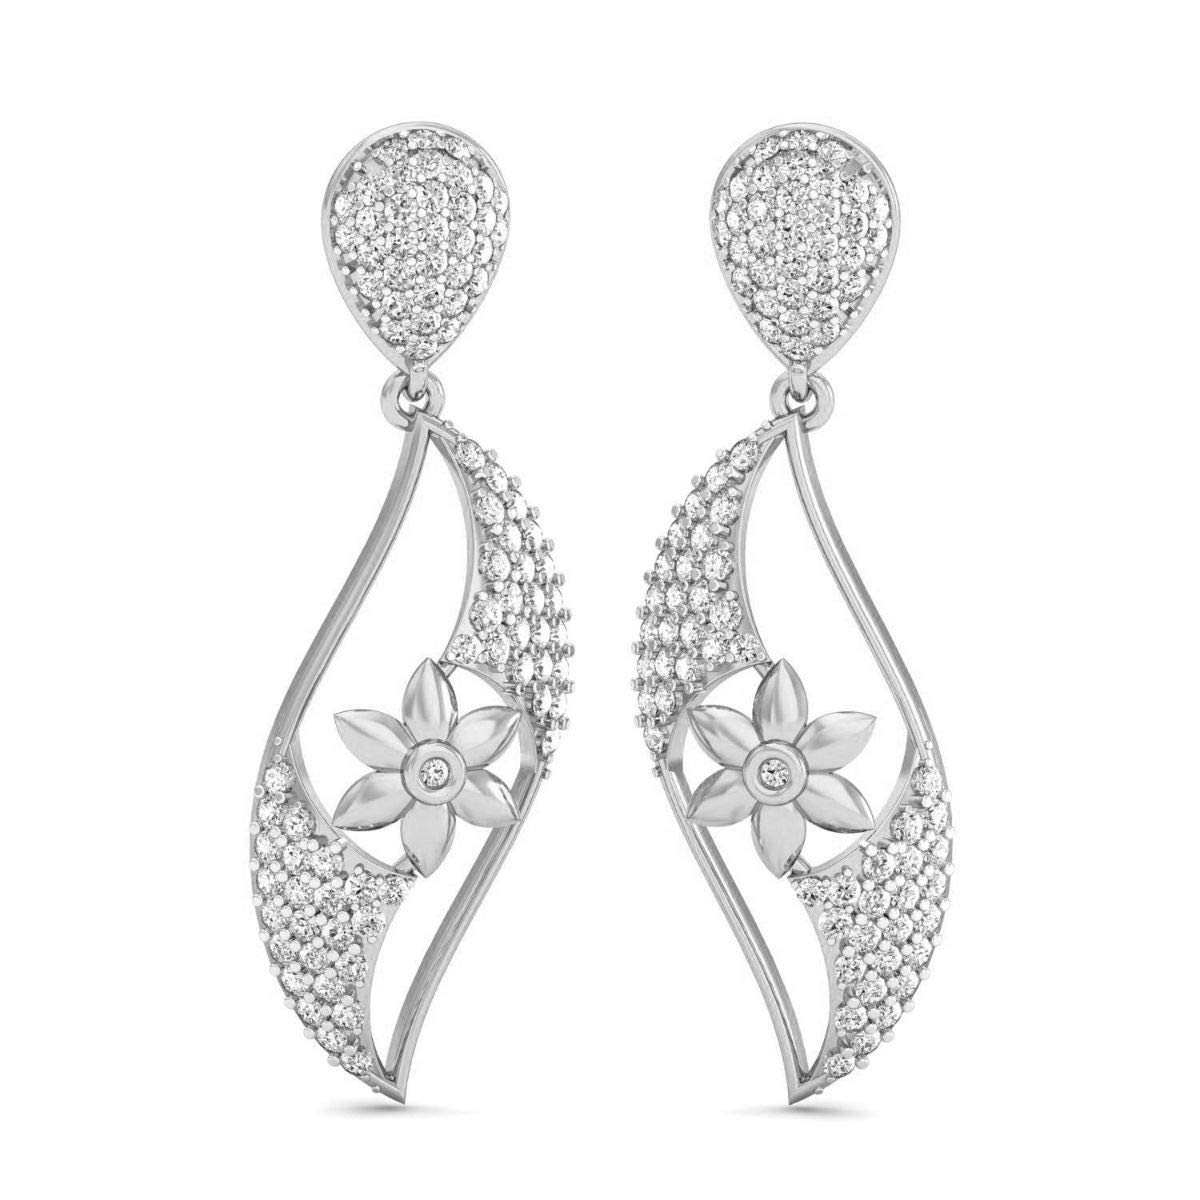 VVS Certified Luxury Traditional Earrings 1.66 Ctw Natural Diamond With 14K White/Yellow/Rose Gold Drop Earrings